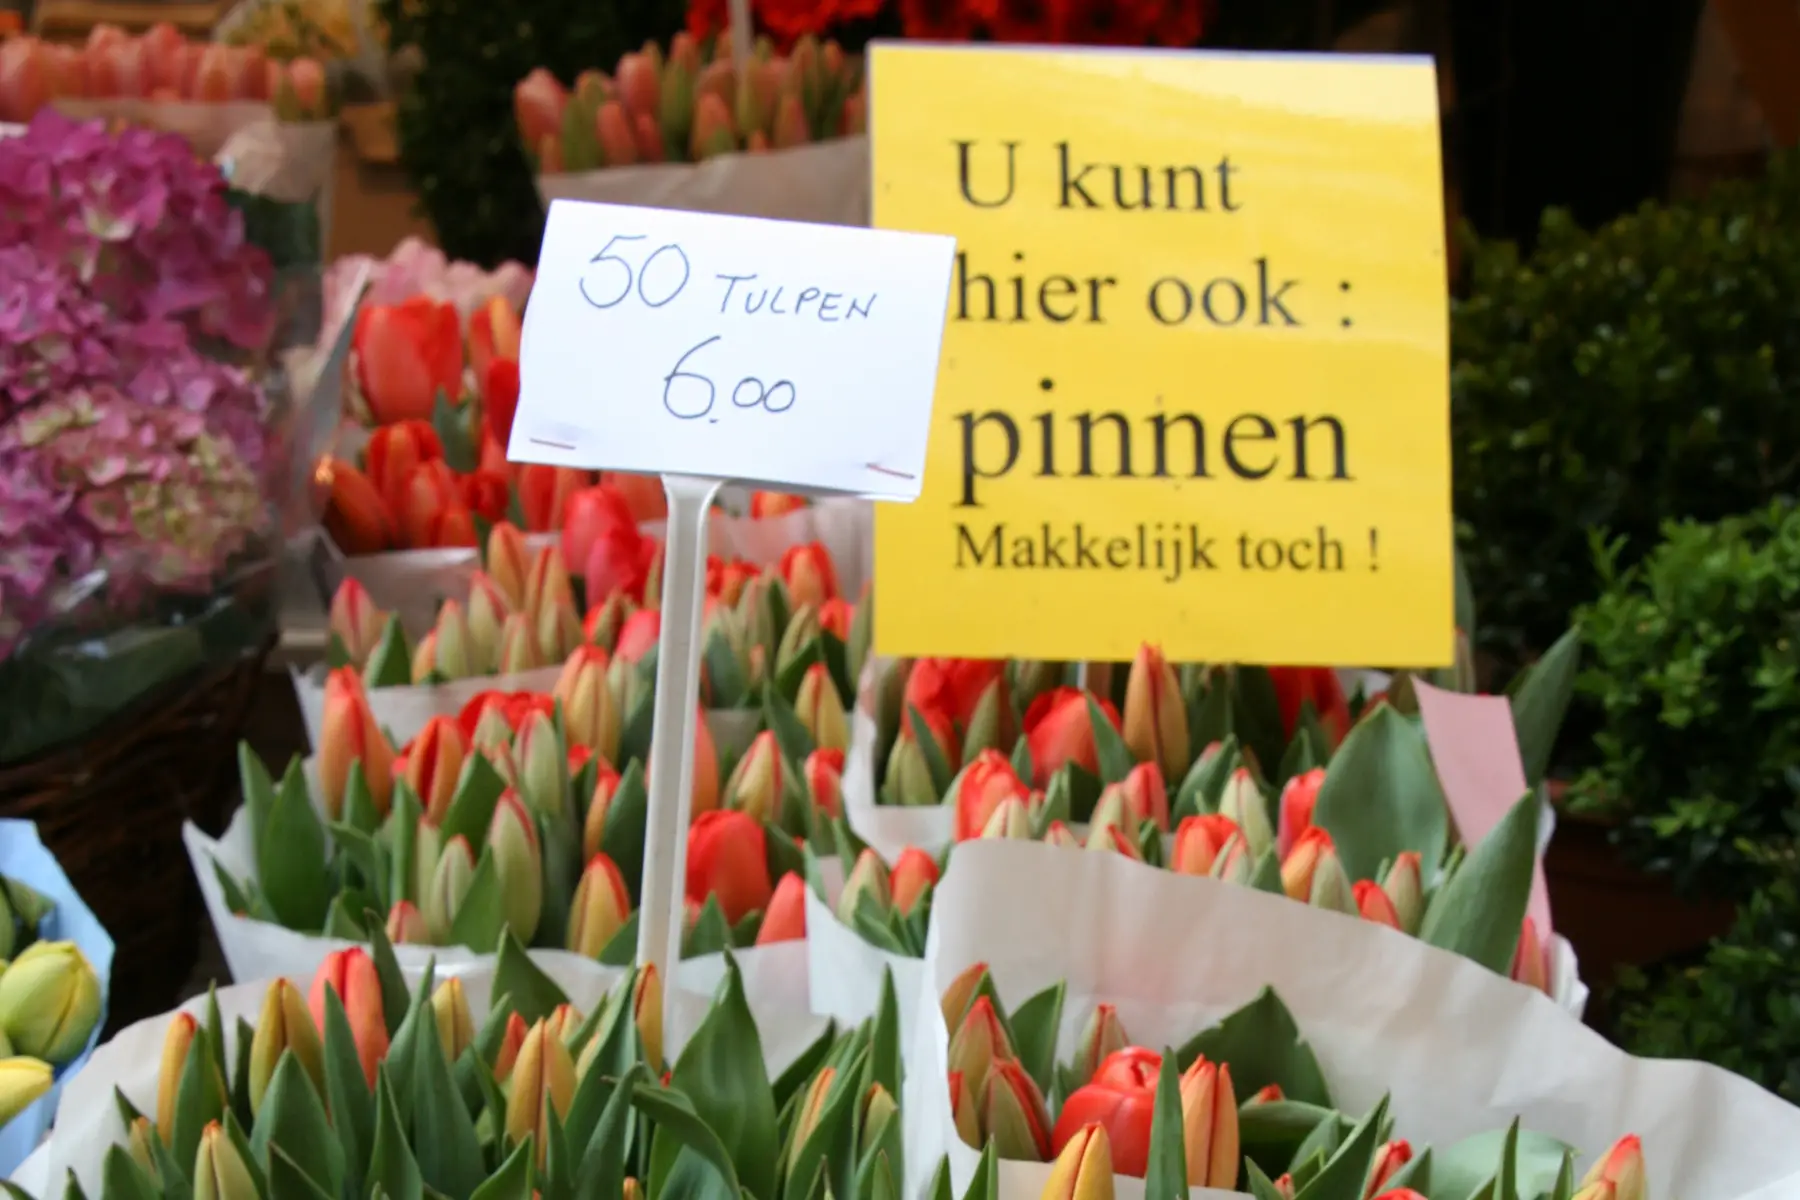 Tulips at a market with the sign 'U kunt ook : pinnen
Makkelijk toch !'
Funny Dutch sign with what looks like rude words